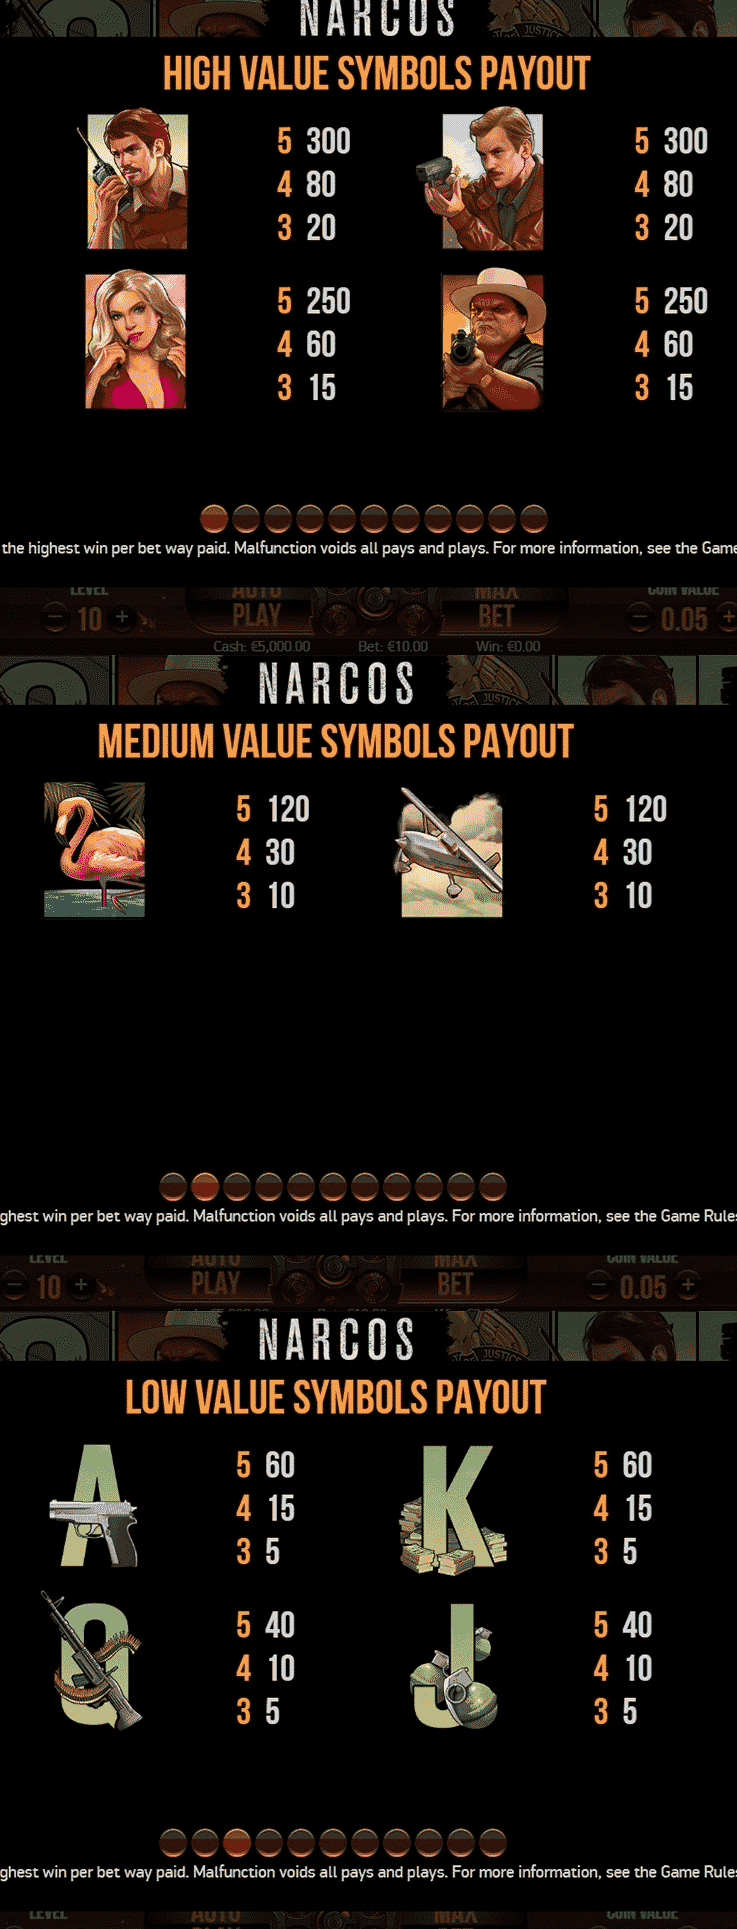 This is the paytable of the video slot Narcos by Net Entertainment.